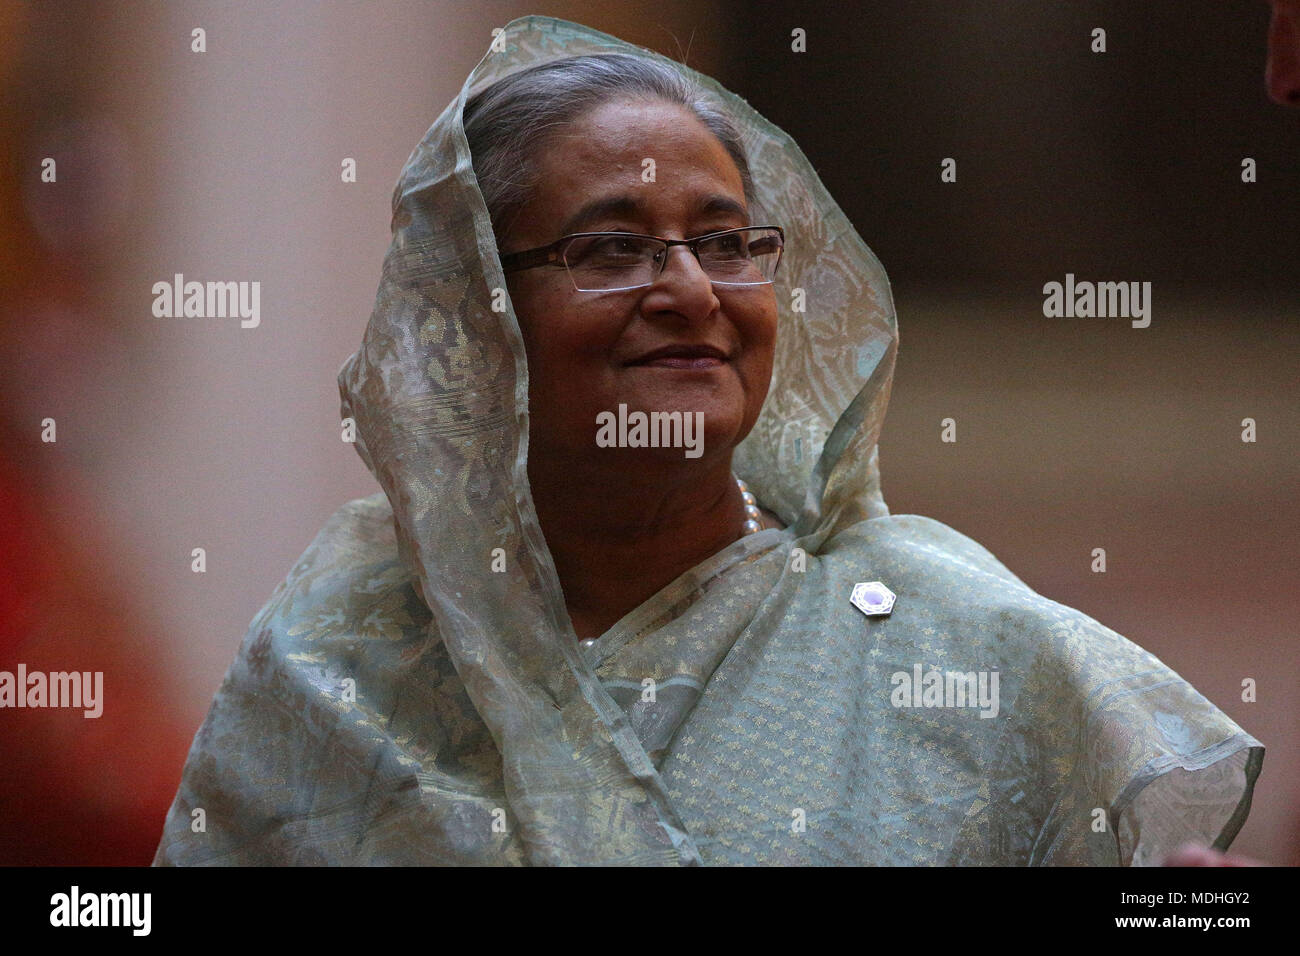 Prime Minister of Bangladesh Sheikh Hasina arrives in the East Gallery at Buckingham Palace in London as Queen Elizabeth II hosts a dinner during the Commonwealth Heads of Government Meeting. Stock Photo